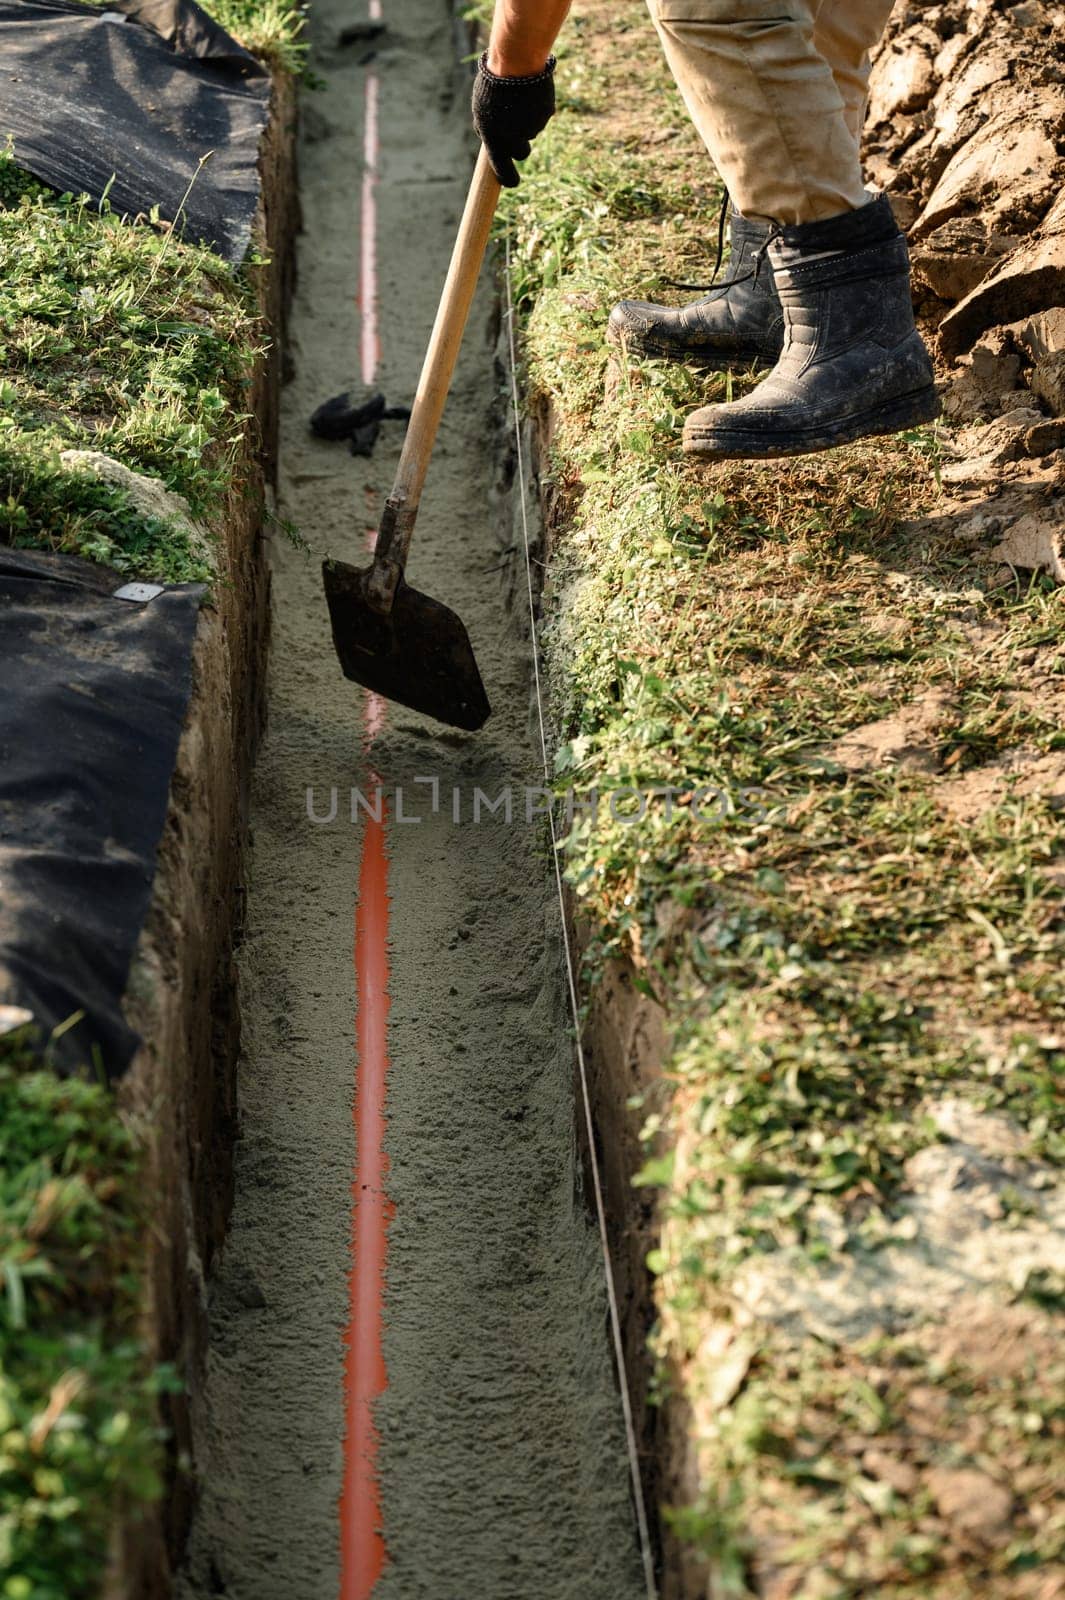 A plumber installs a reinforced orange sewer pipe during site maintenance.